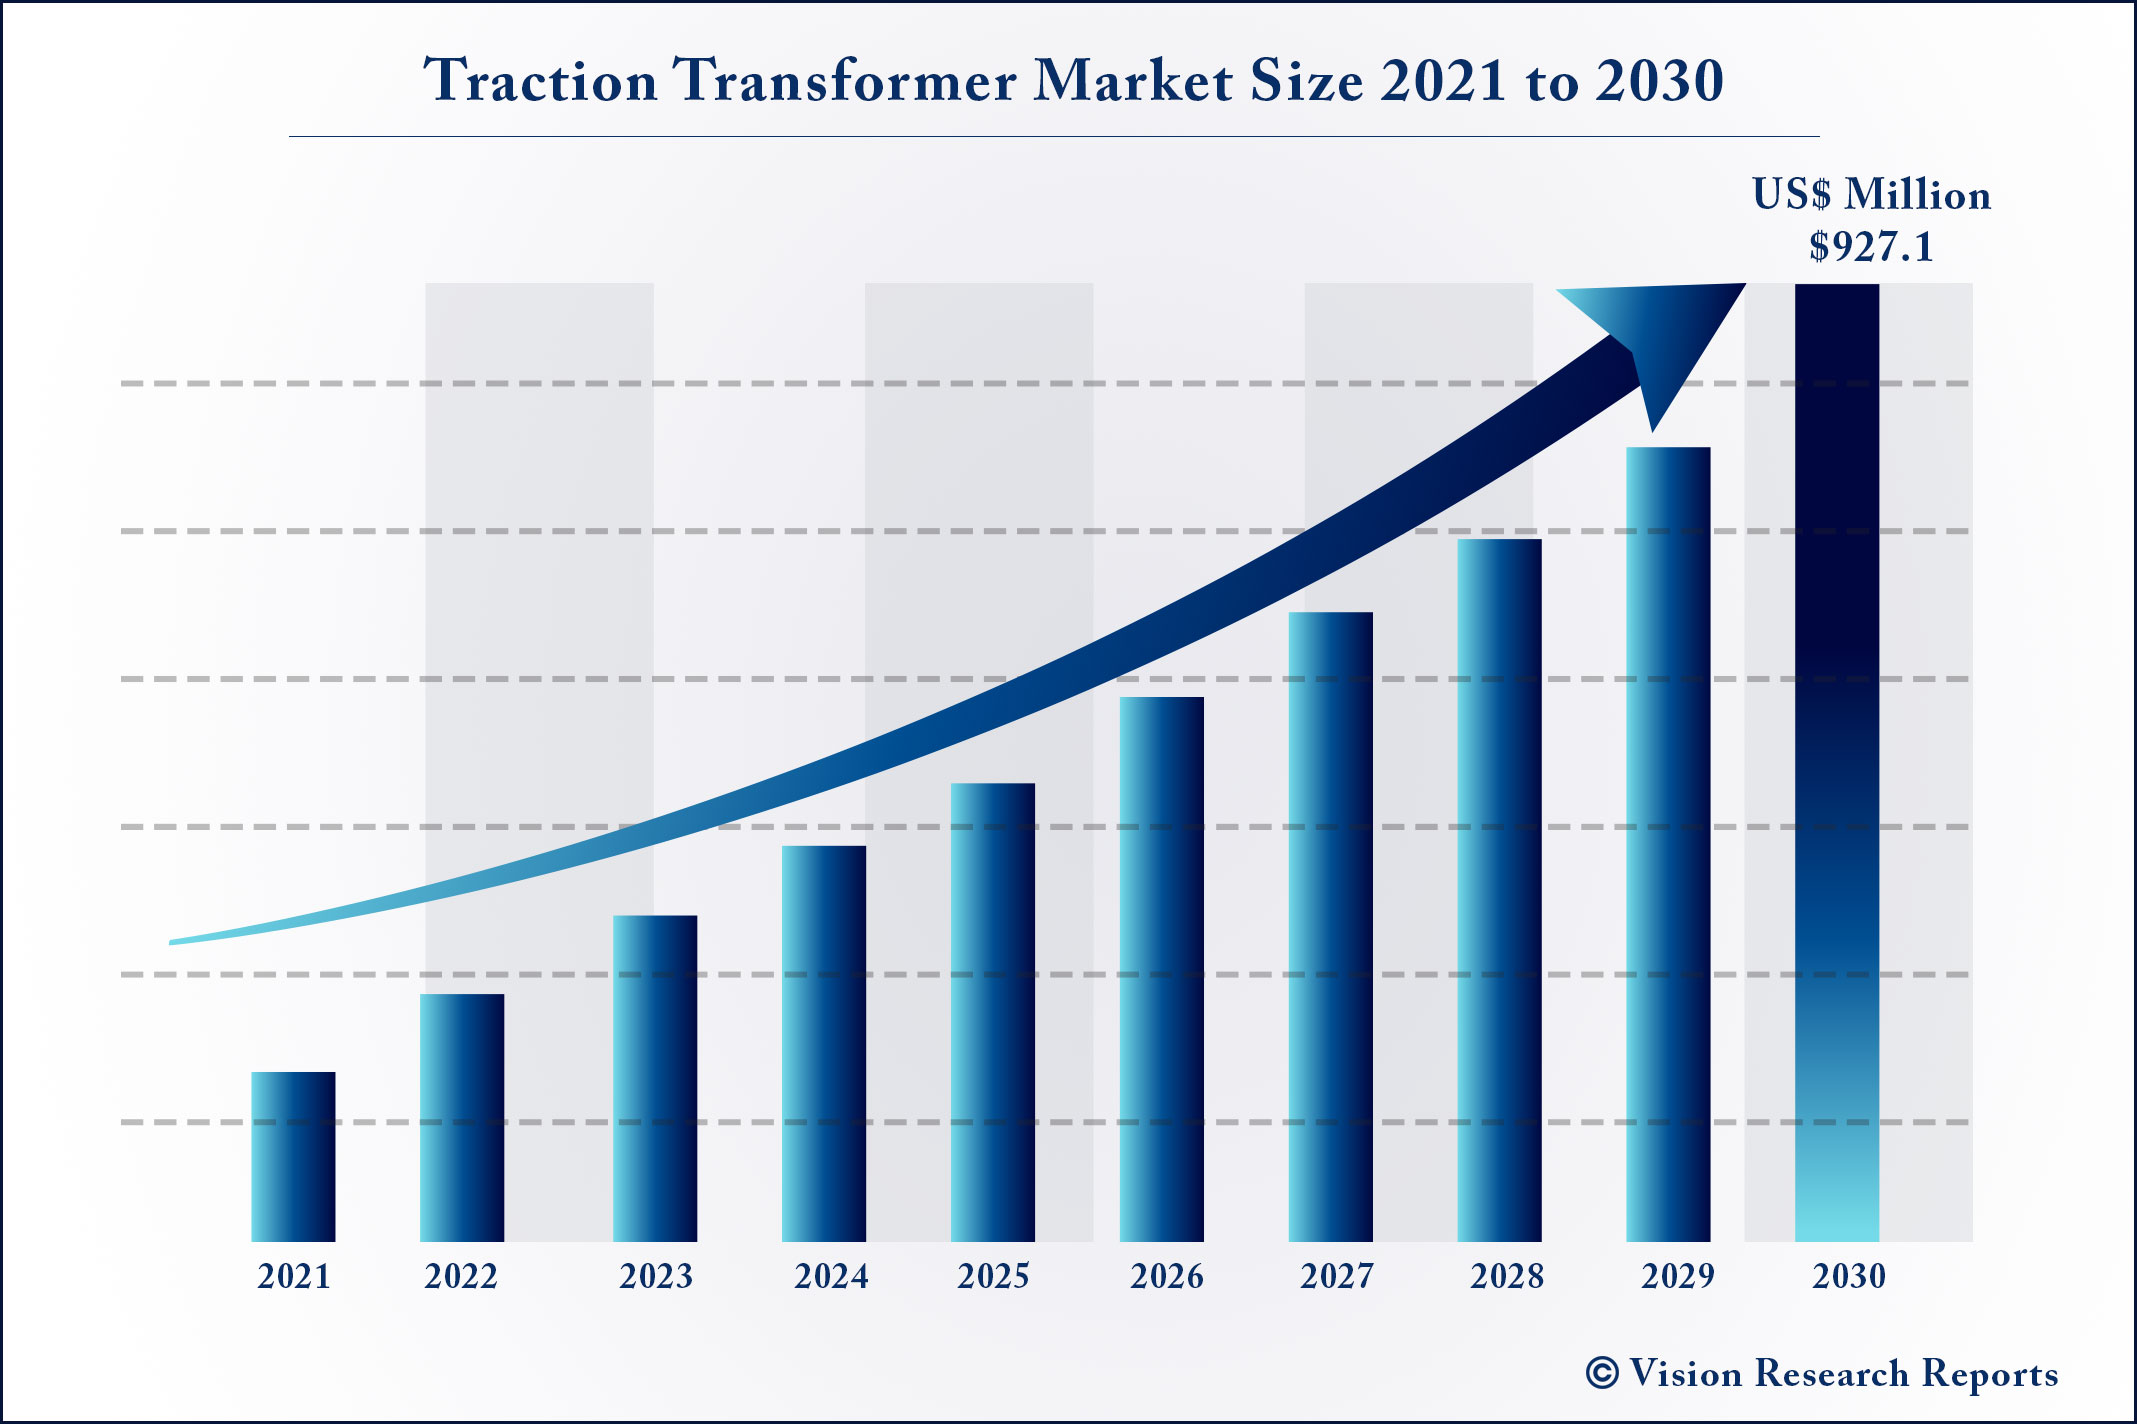 Traction Transformer Market Size 2021 to 2030